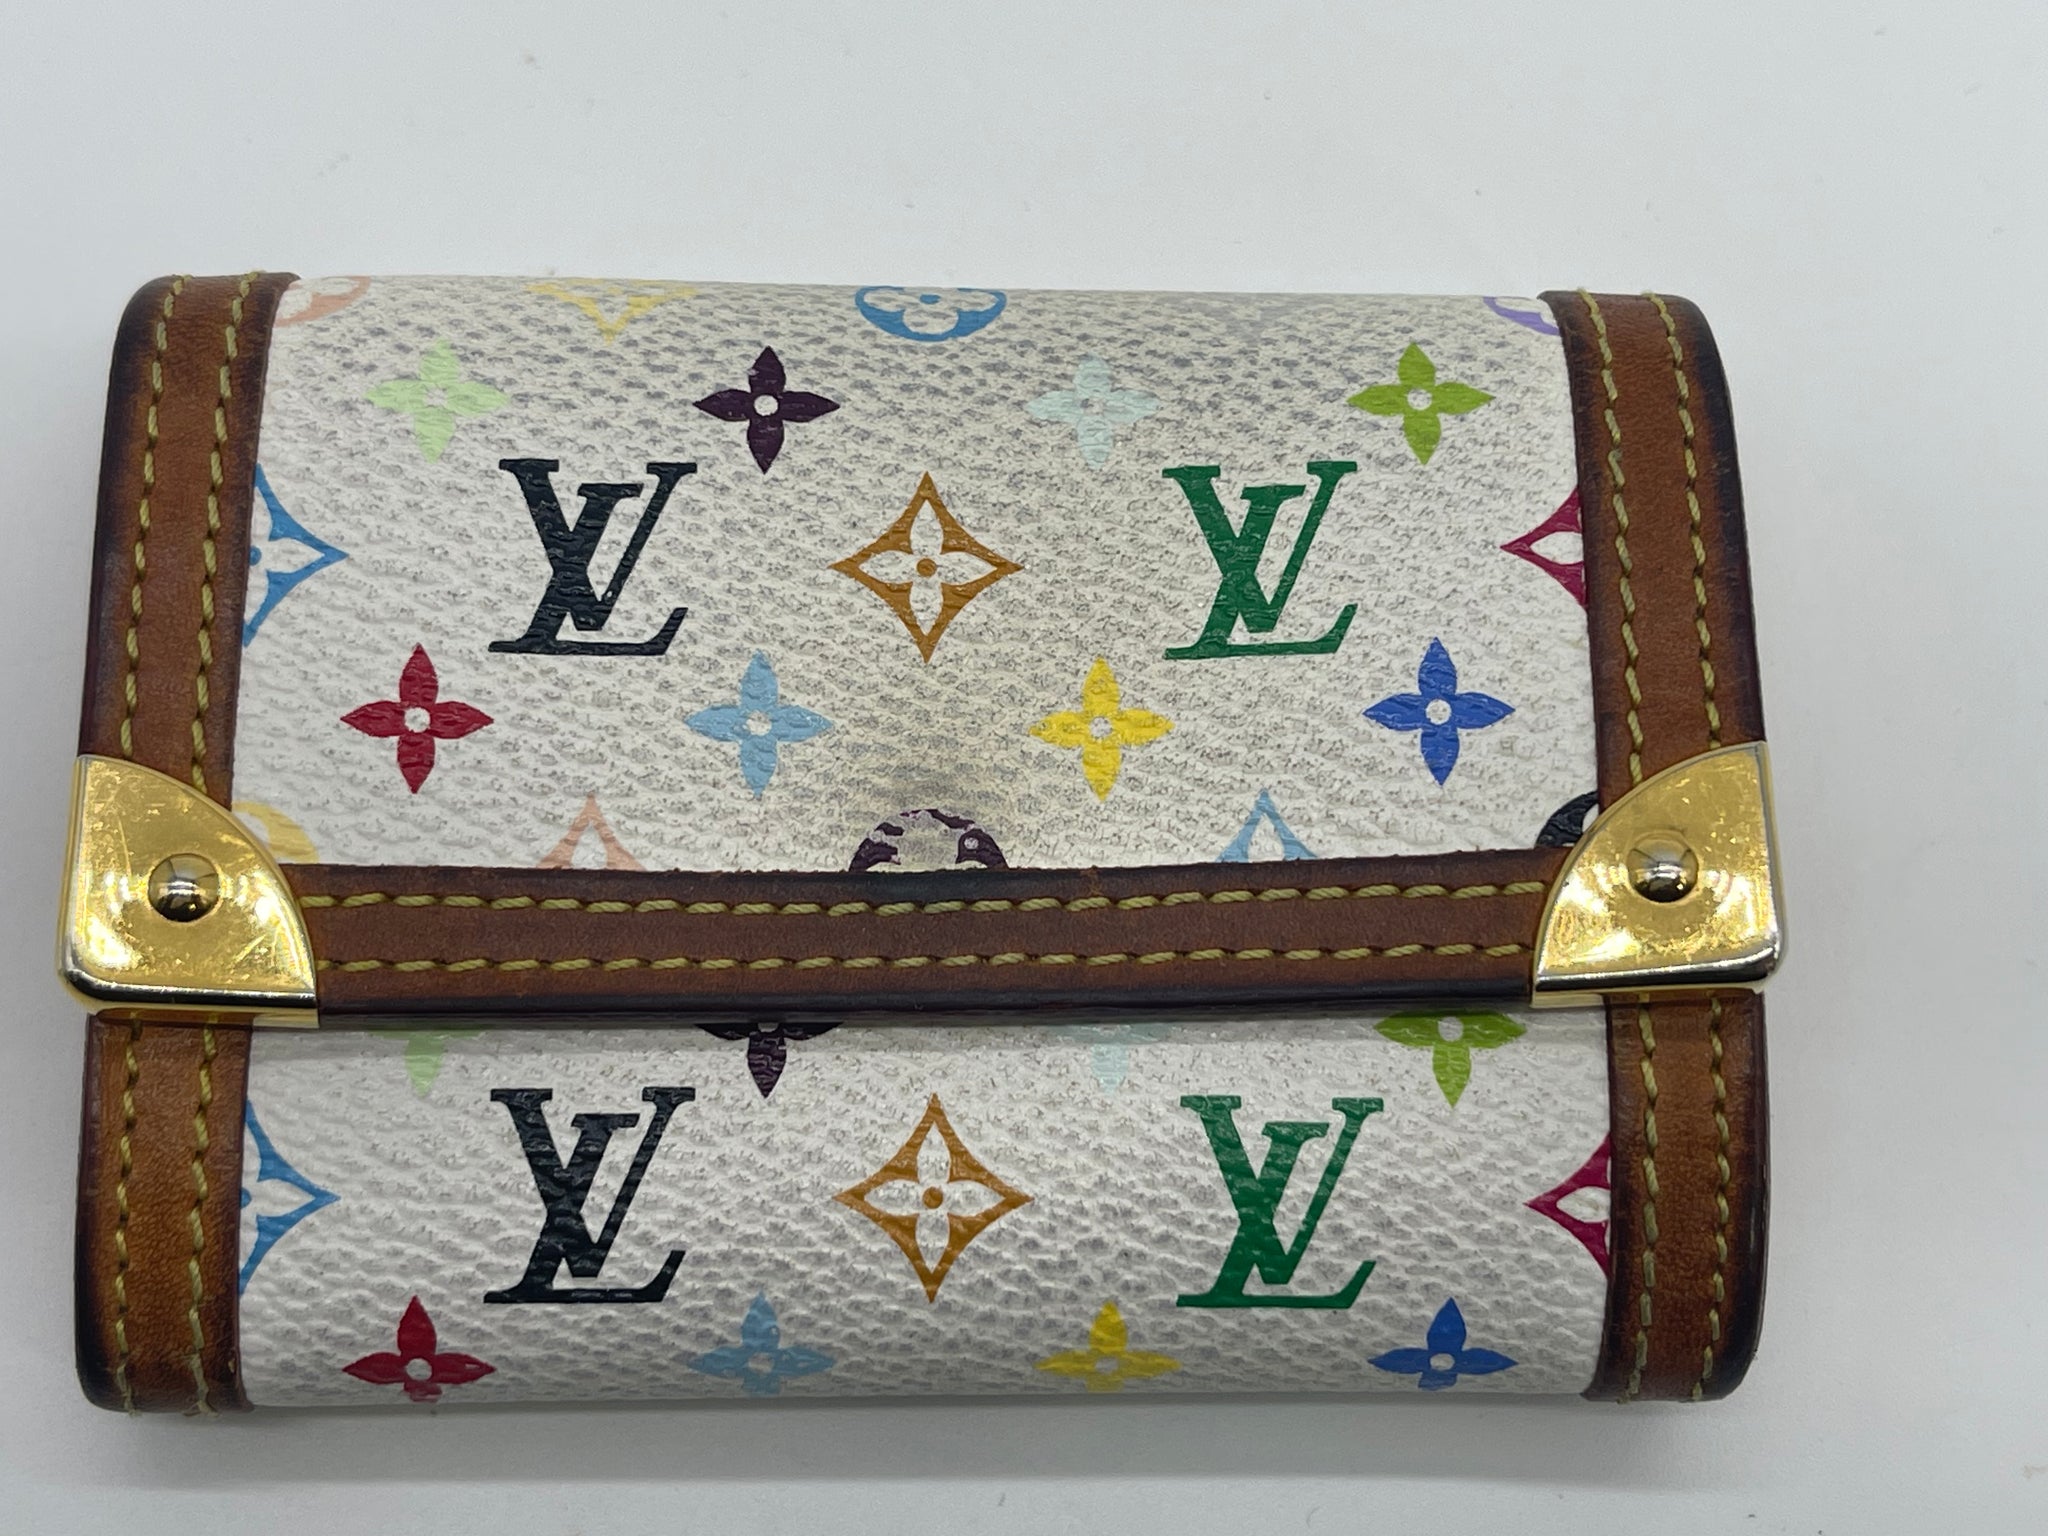 Preloved Louis Vuitton Multicolor French Wallet TH0026 011723 – KimmieBBags  LLC